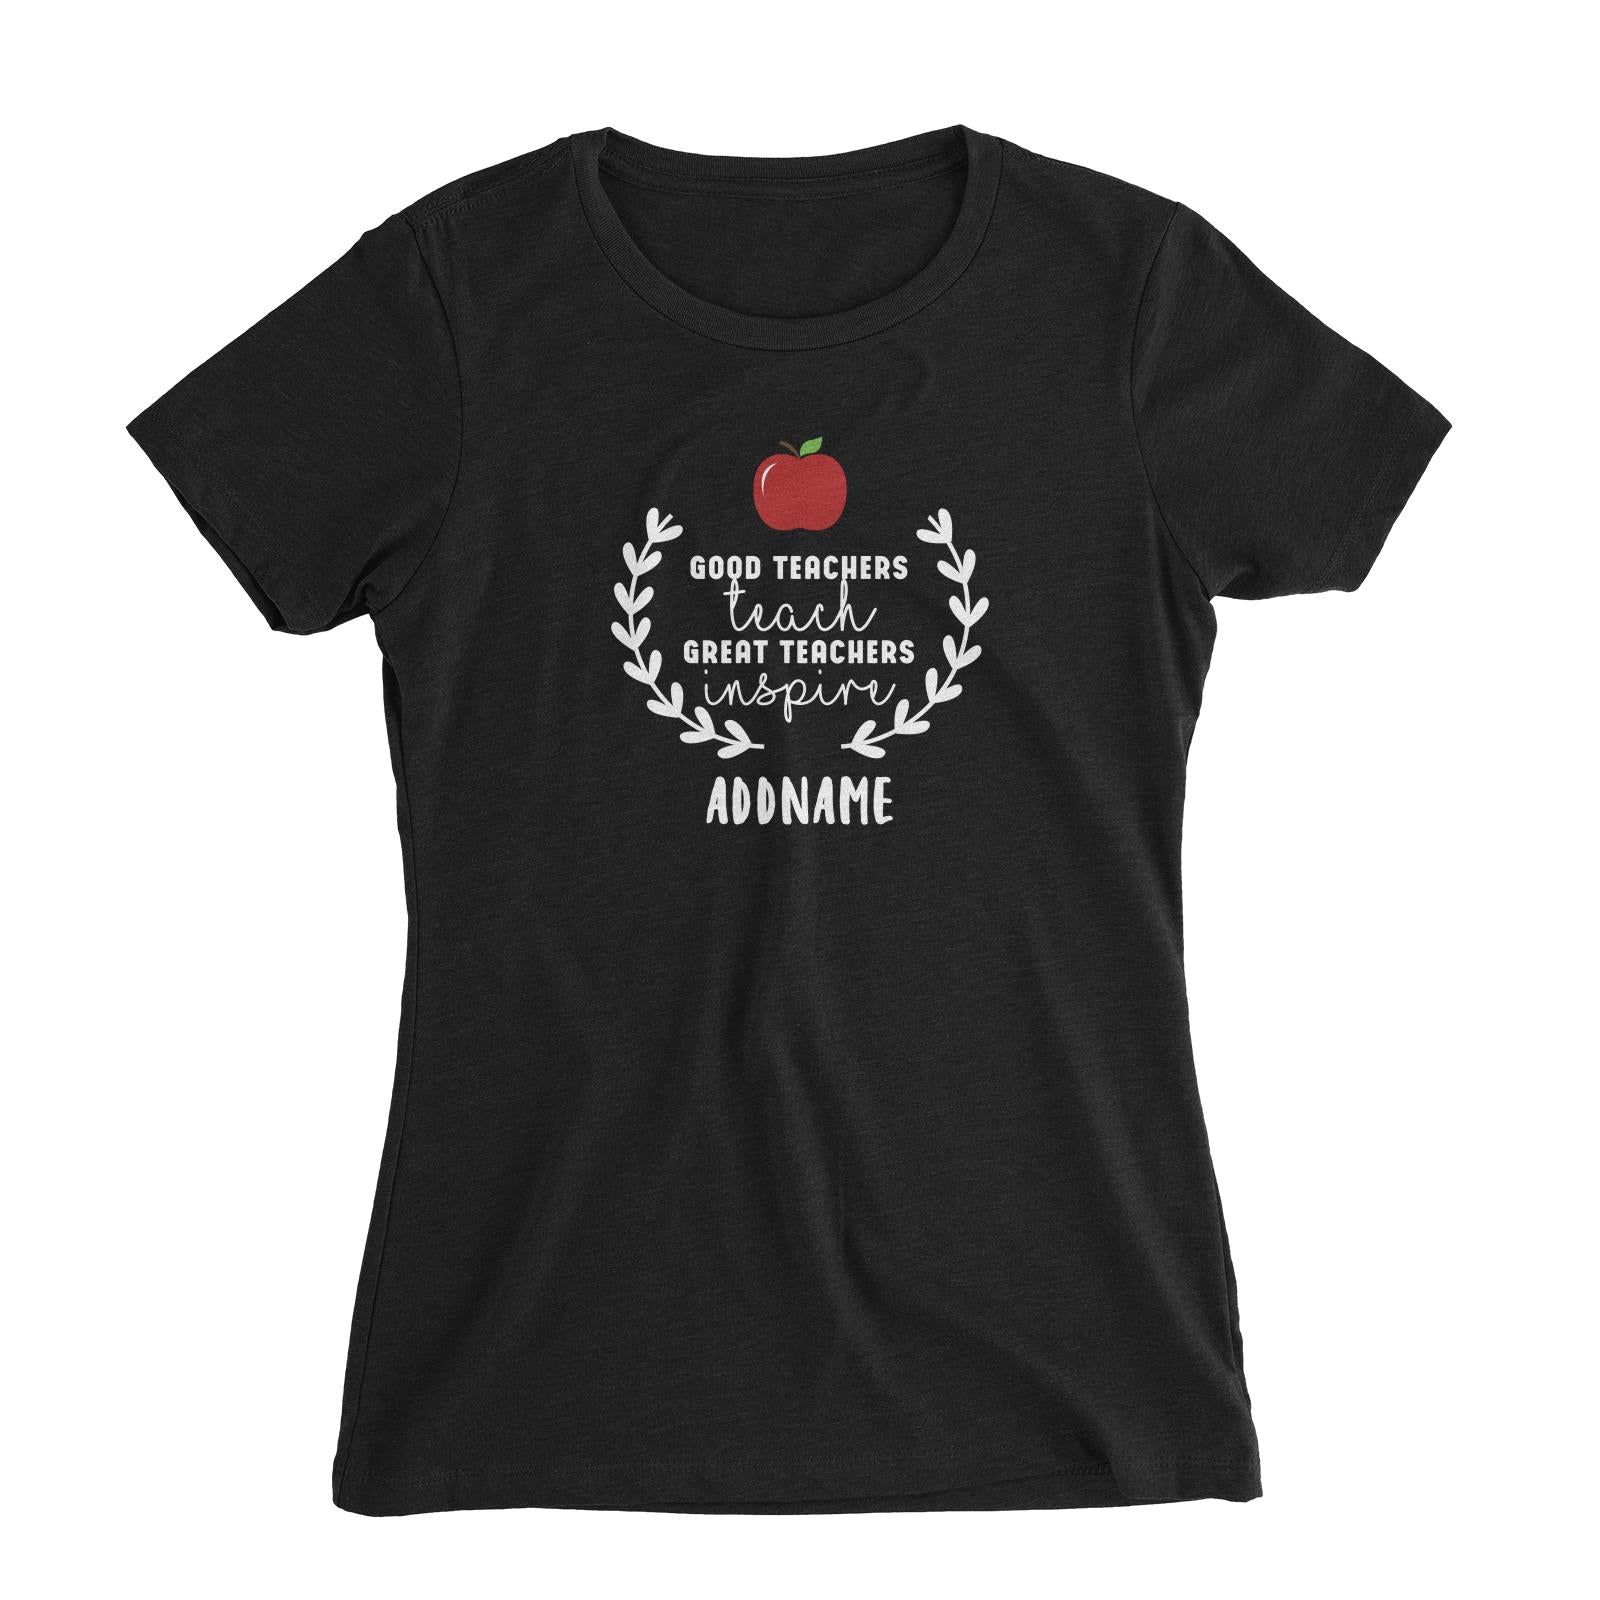 Great Teachers Good Teachers Teach Great Teachers Inspire Addname Women's Slim Fit T-Shirt